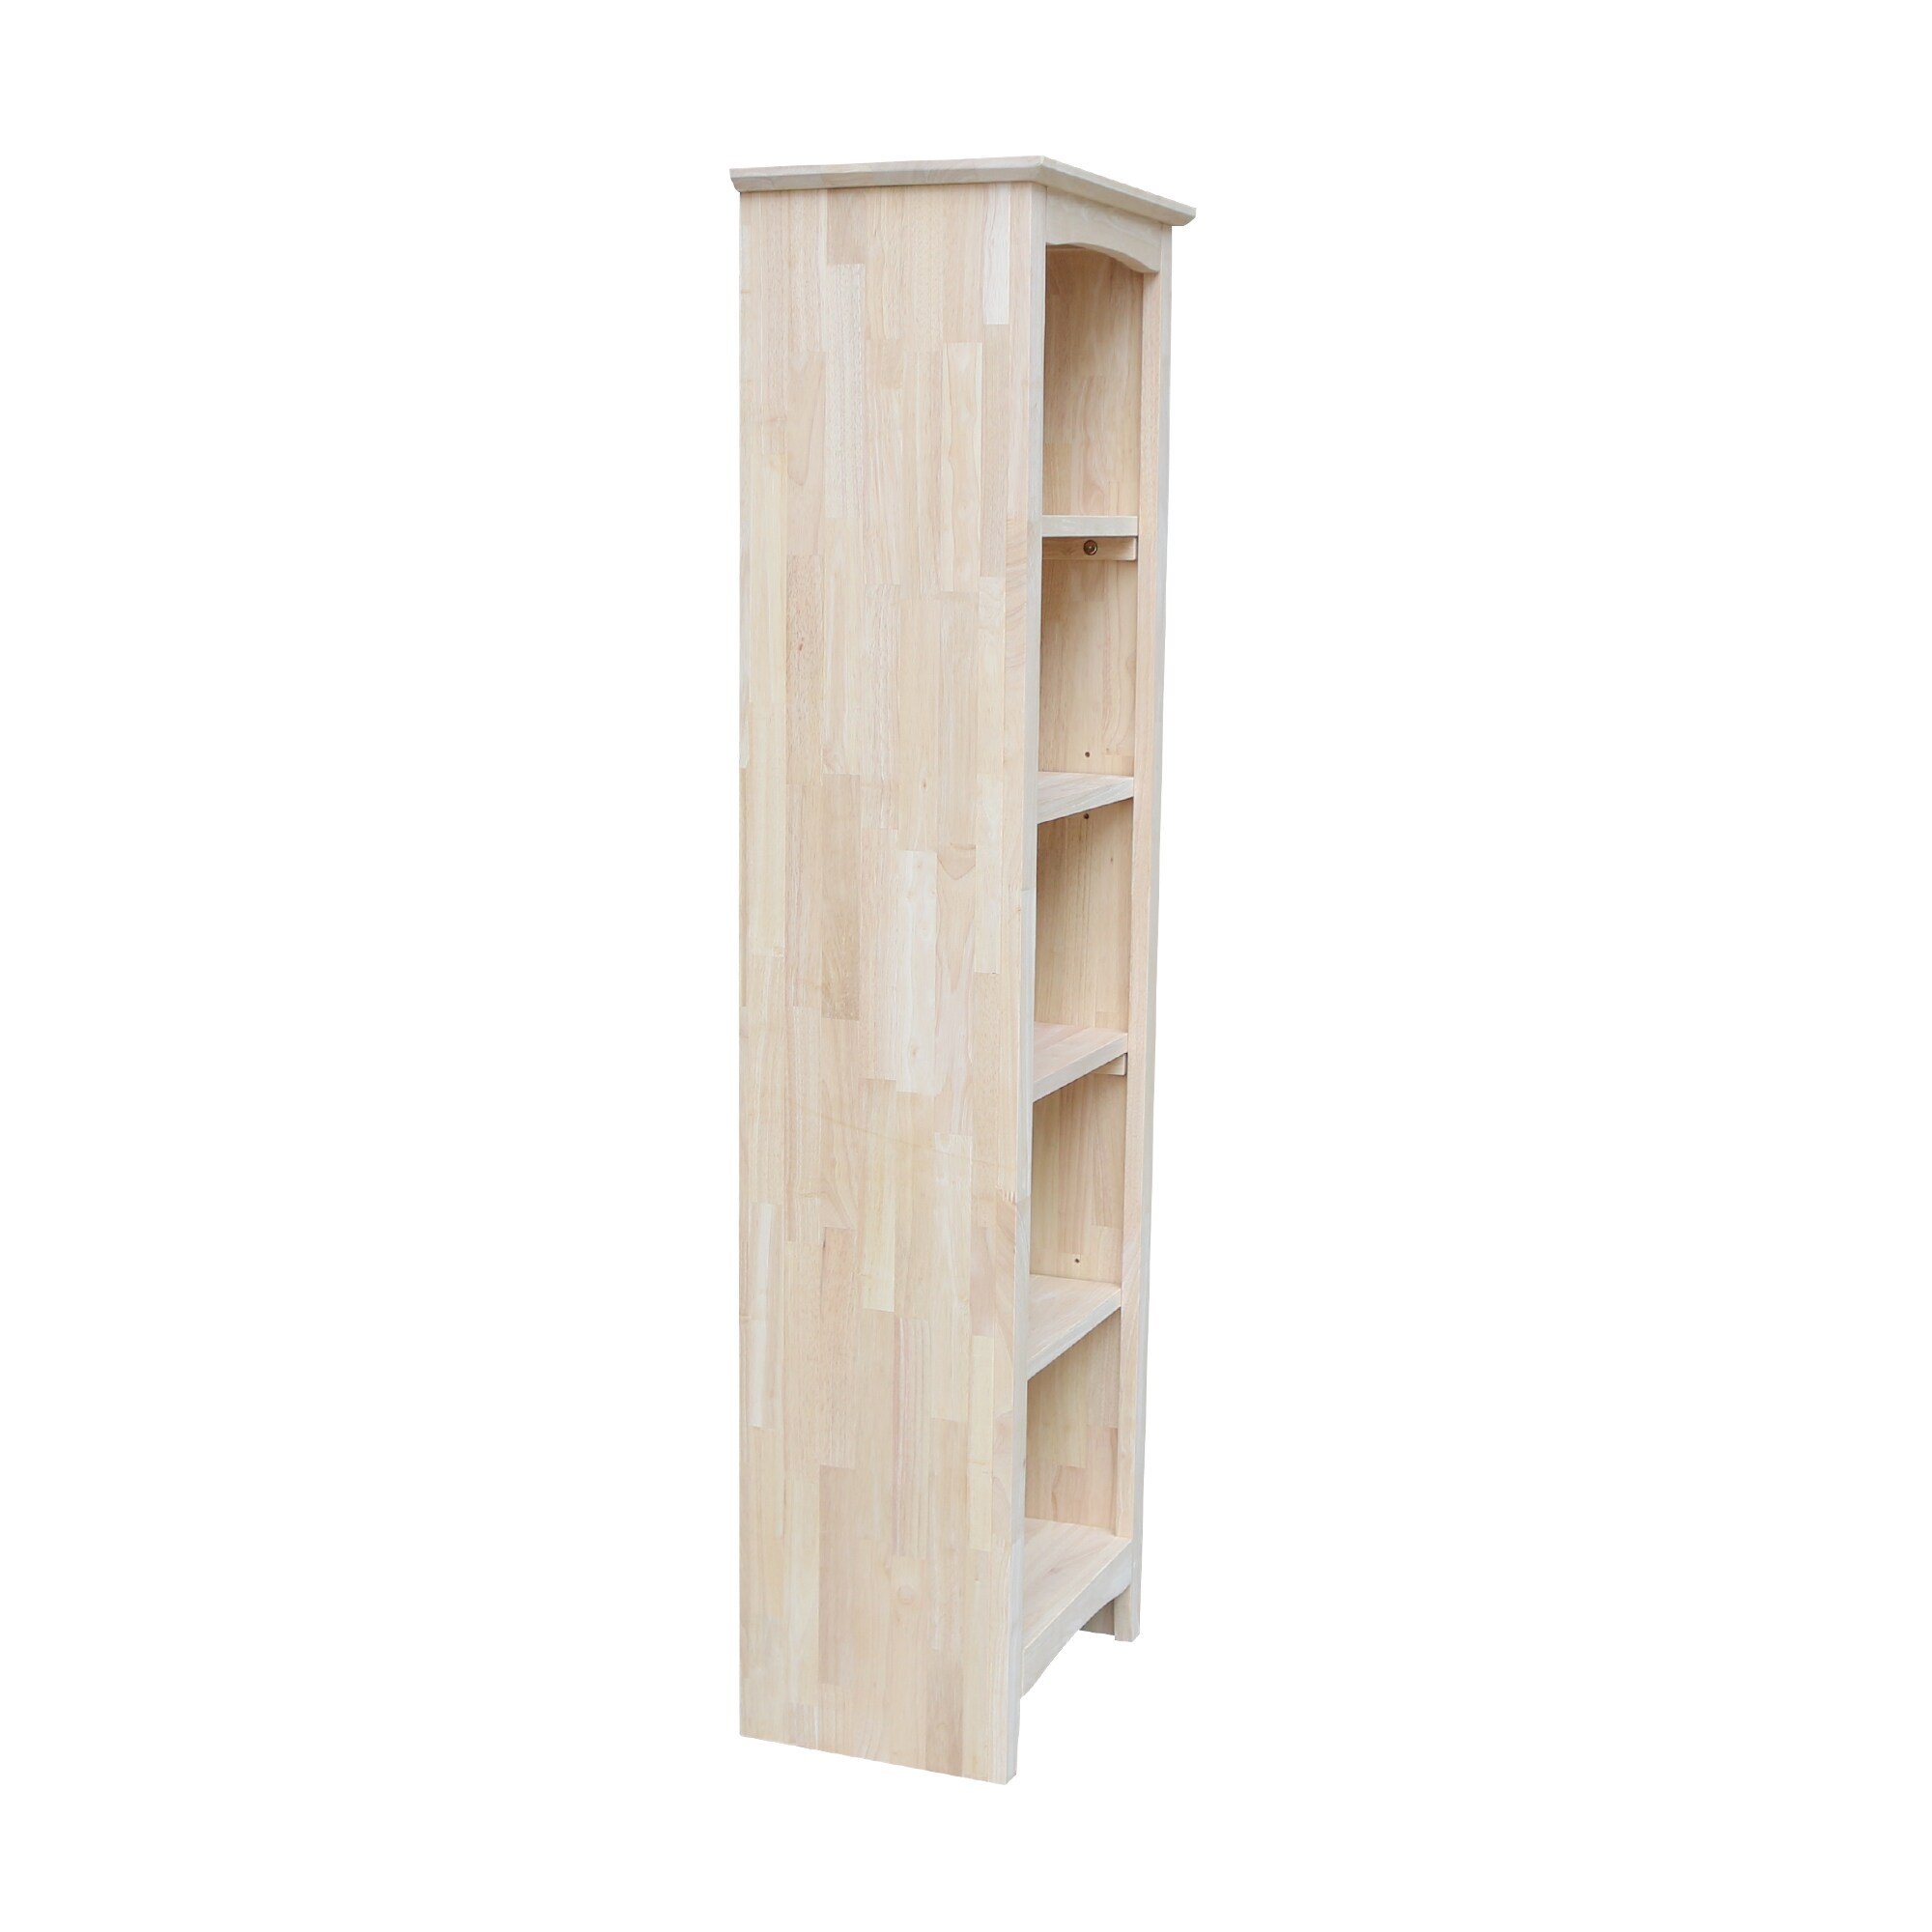 5 Shelf Modular Bookcase, 36 Inch Tall Bookcase With Doors